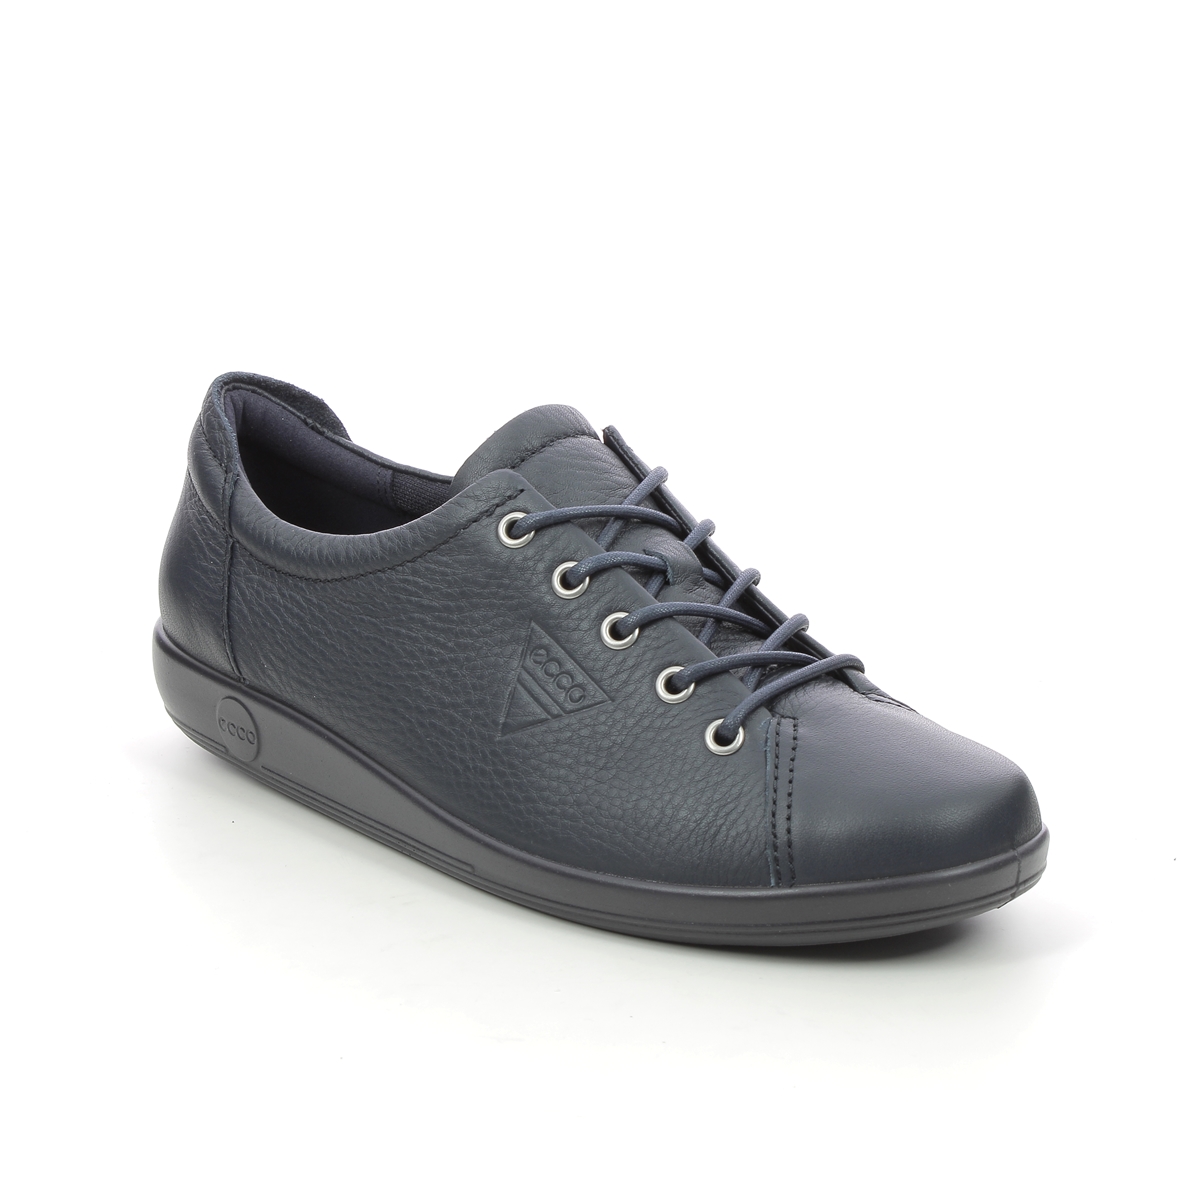 Ecco Soft 2.0 Navy Leather Womens Lacing Shoes 206503-11038 In Size 41 In Plain Navy Leather